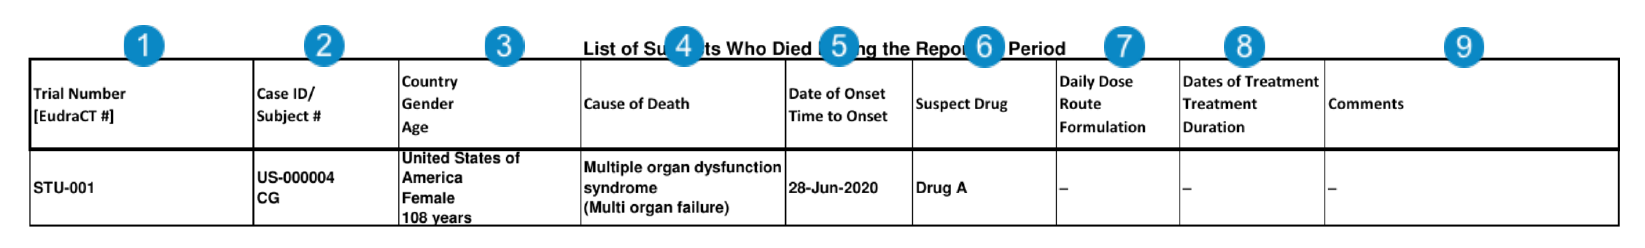 DSUR Appendix List of Subjects Who Died During the Reporting Period